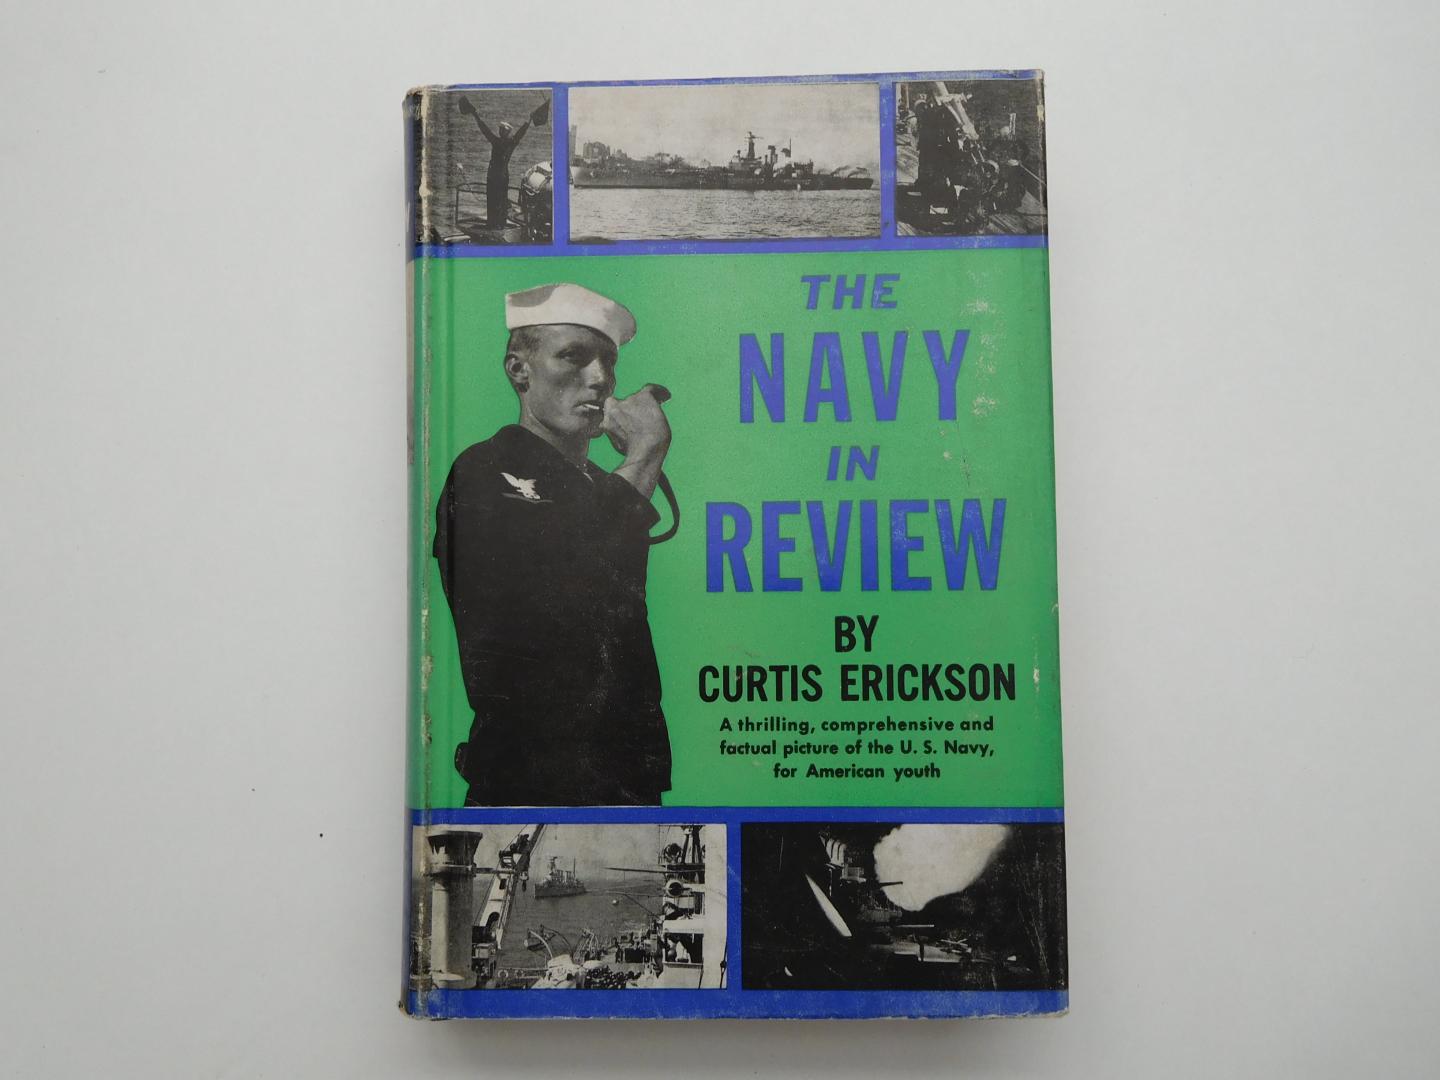 Erickson, Curtis - The Navy in review